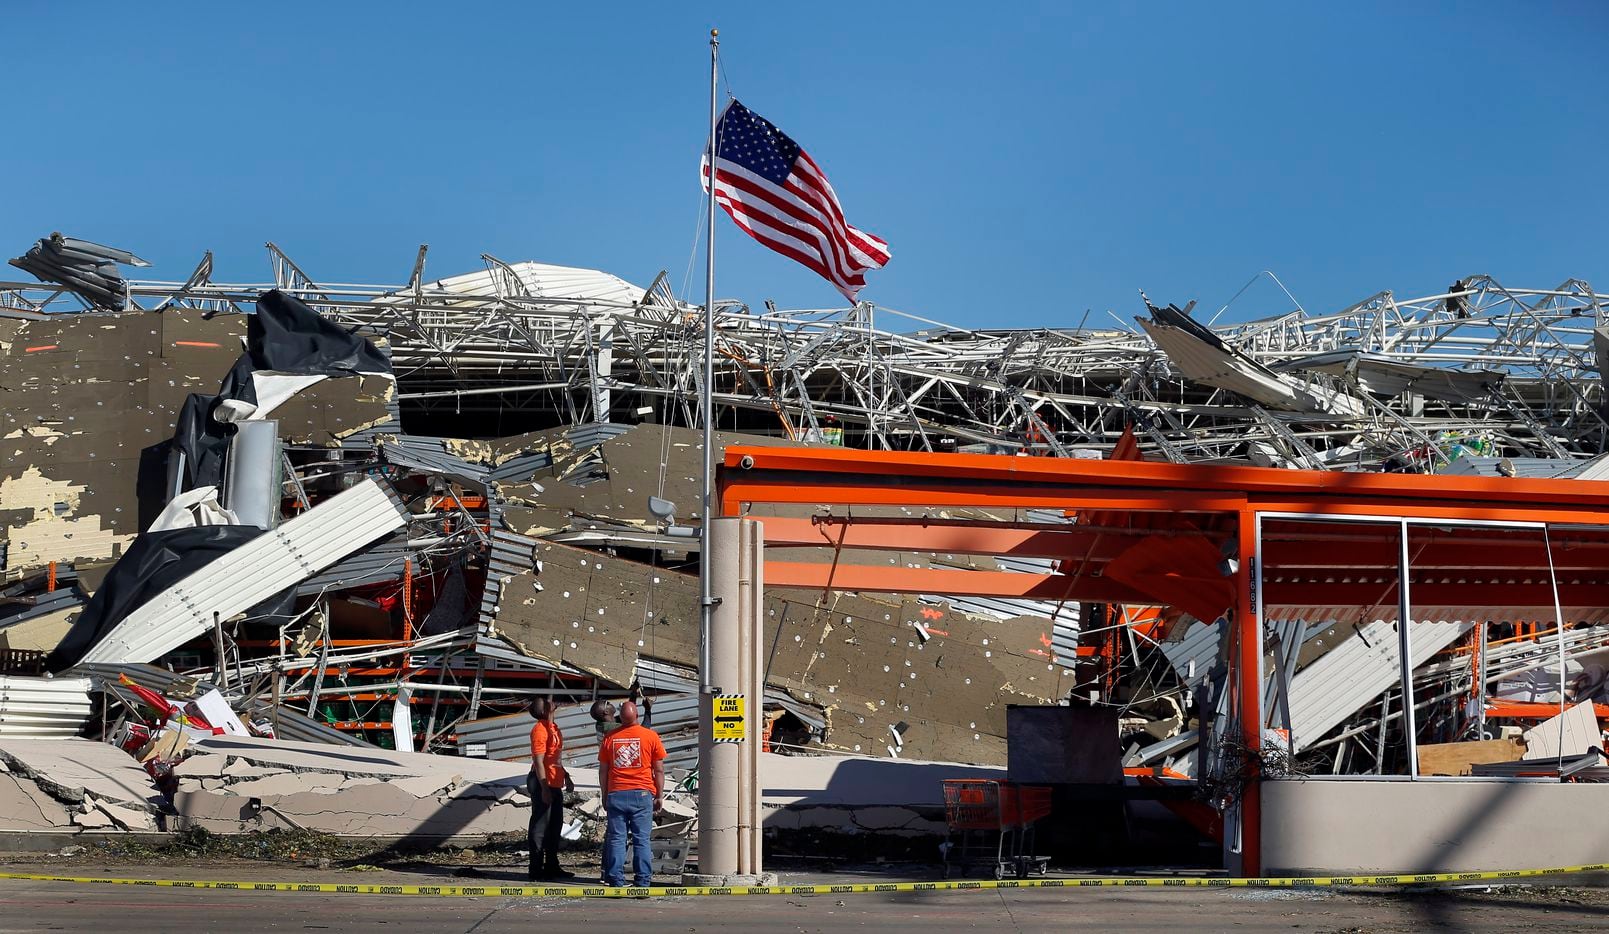 The Home Depot employees A.J. Kobena (center) raises the U.S. flag on the slightly bent flagpole outside the destroyed store on N. Central Expressway in Dallas, Monday, October 21, 2019. Jining him were fellow employees Jonathan Shields and Jordan Jasper. A tornado tore through the entire neighborhood knocking down trees and ripping roofs from homes.